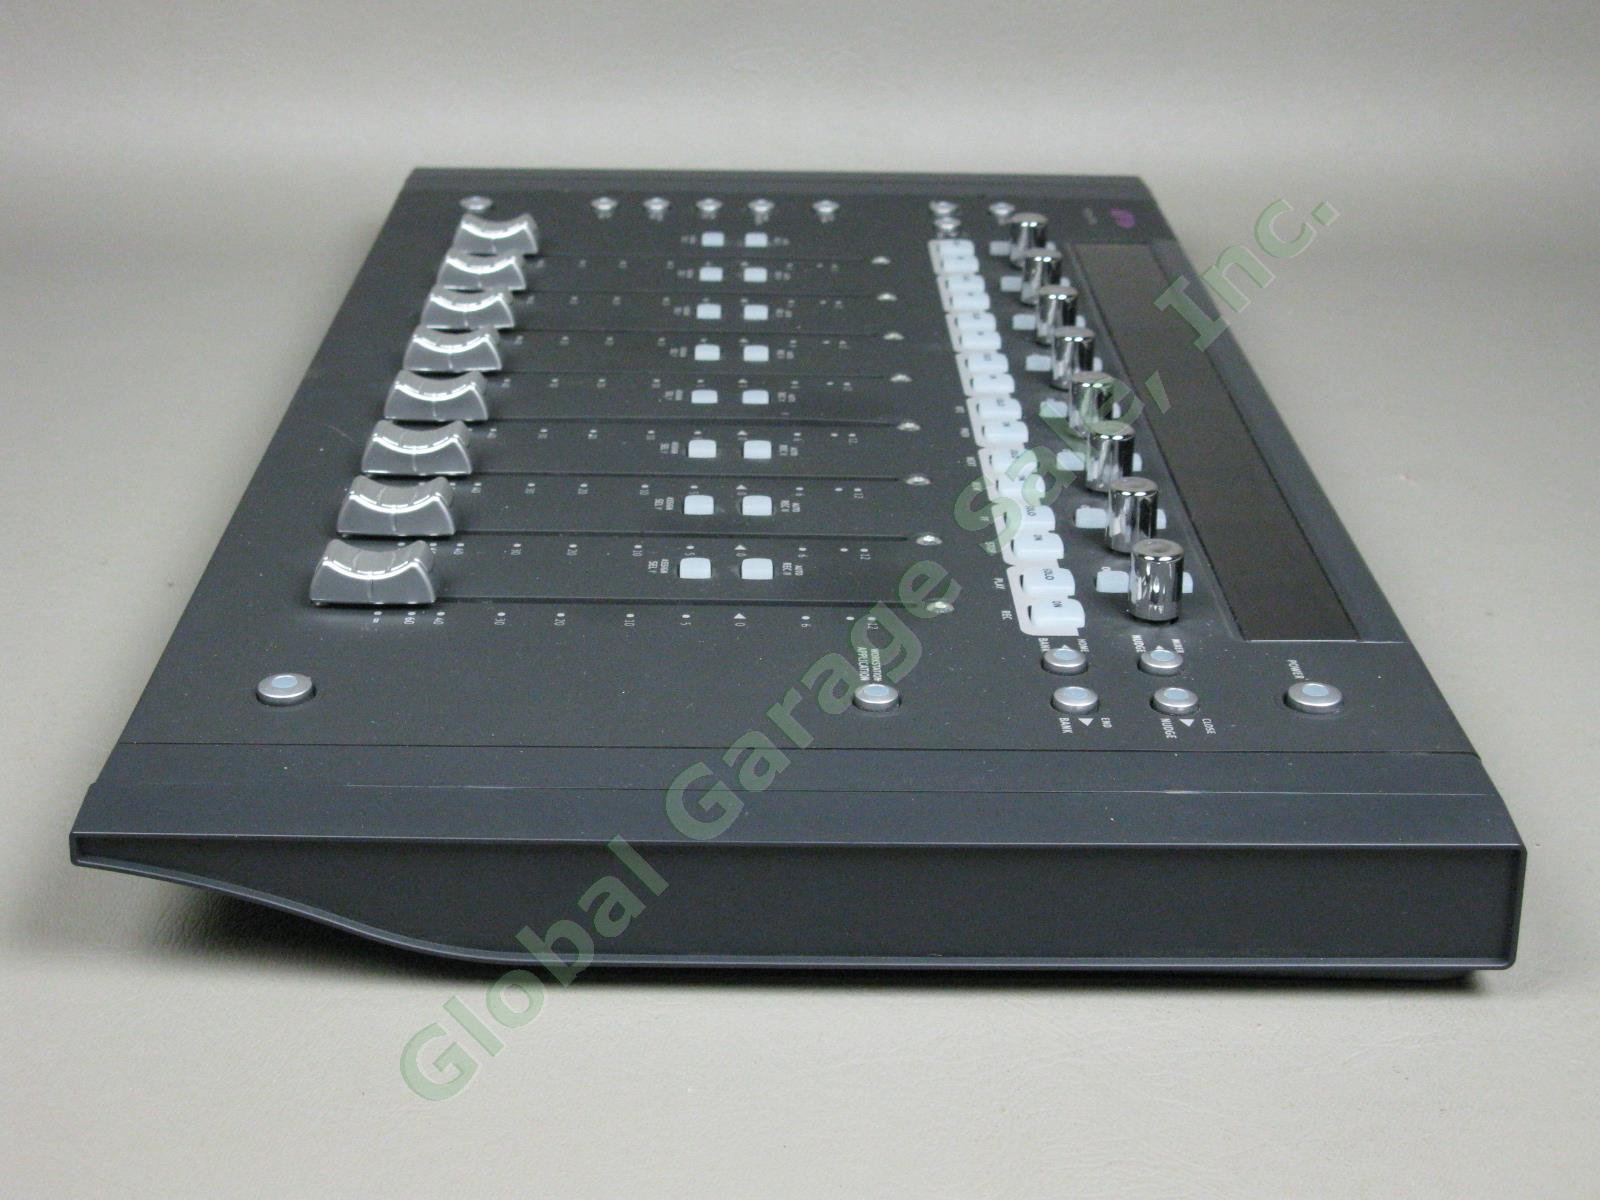 Avid Euphonix Artist Mix Compact 8-Fader Control Surface Mixer One Owner MINT! 5